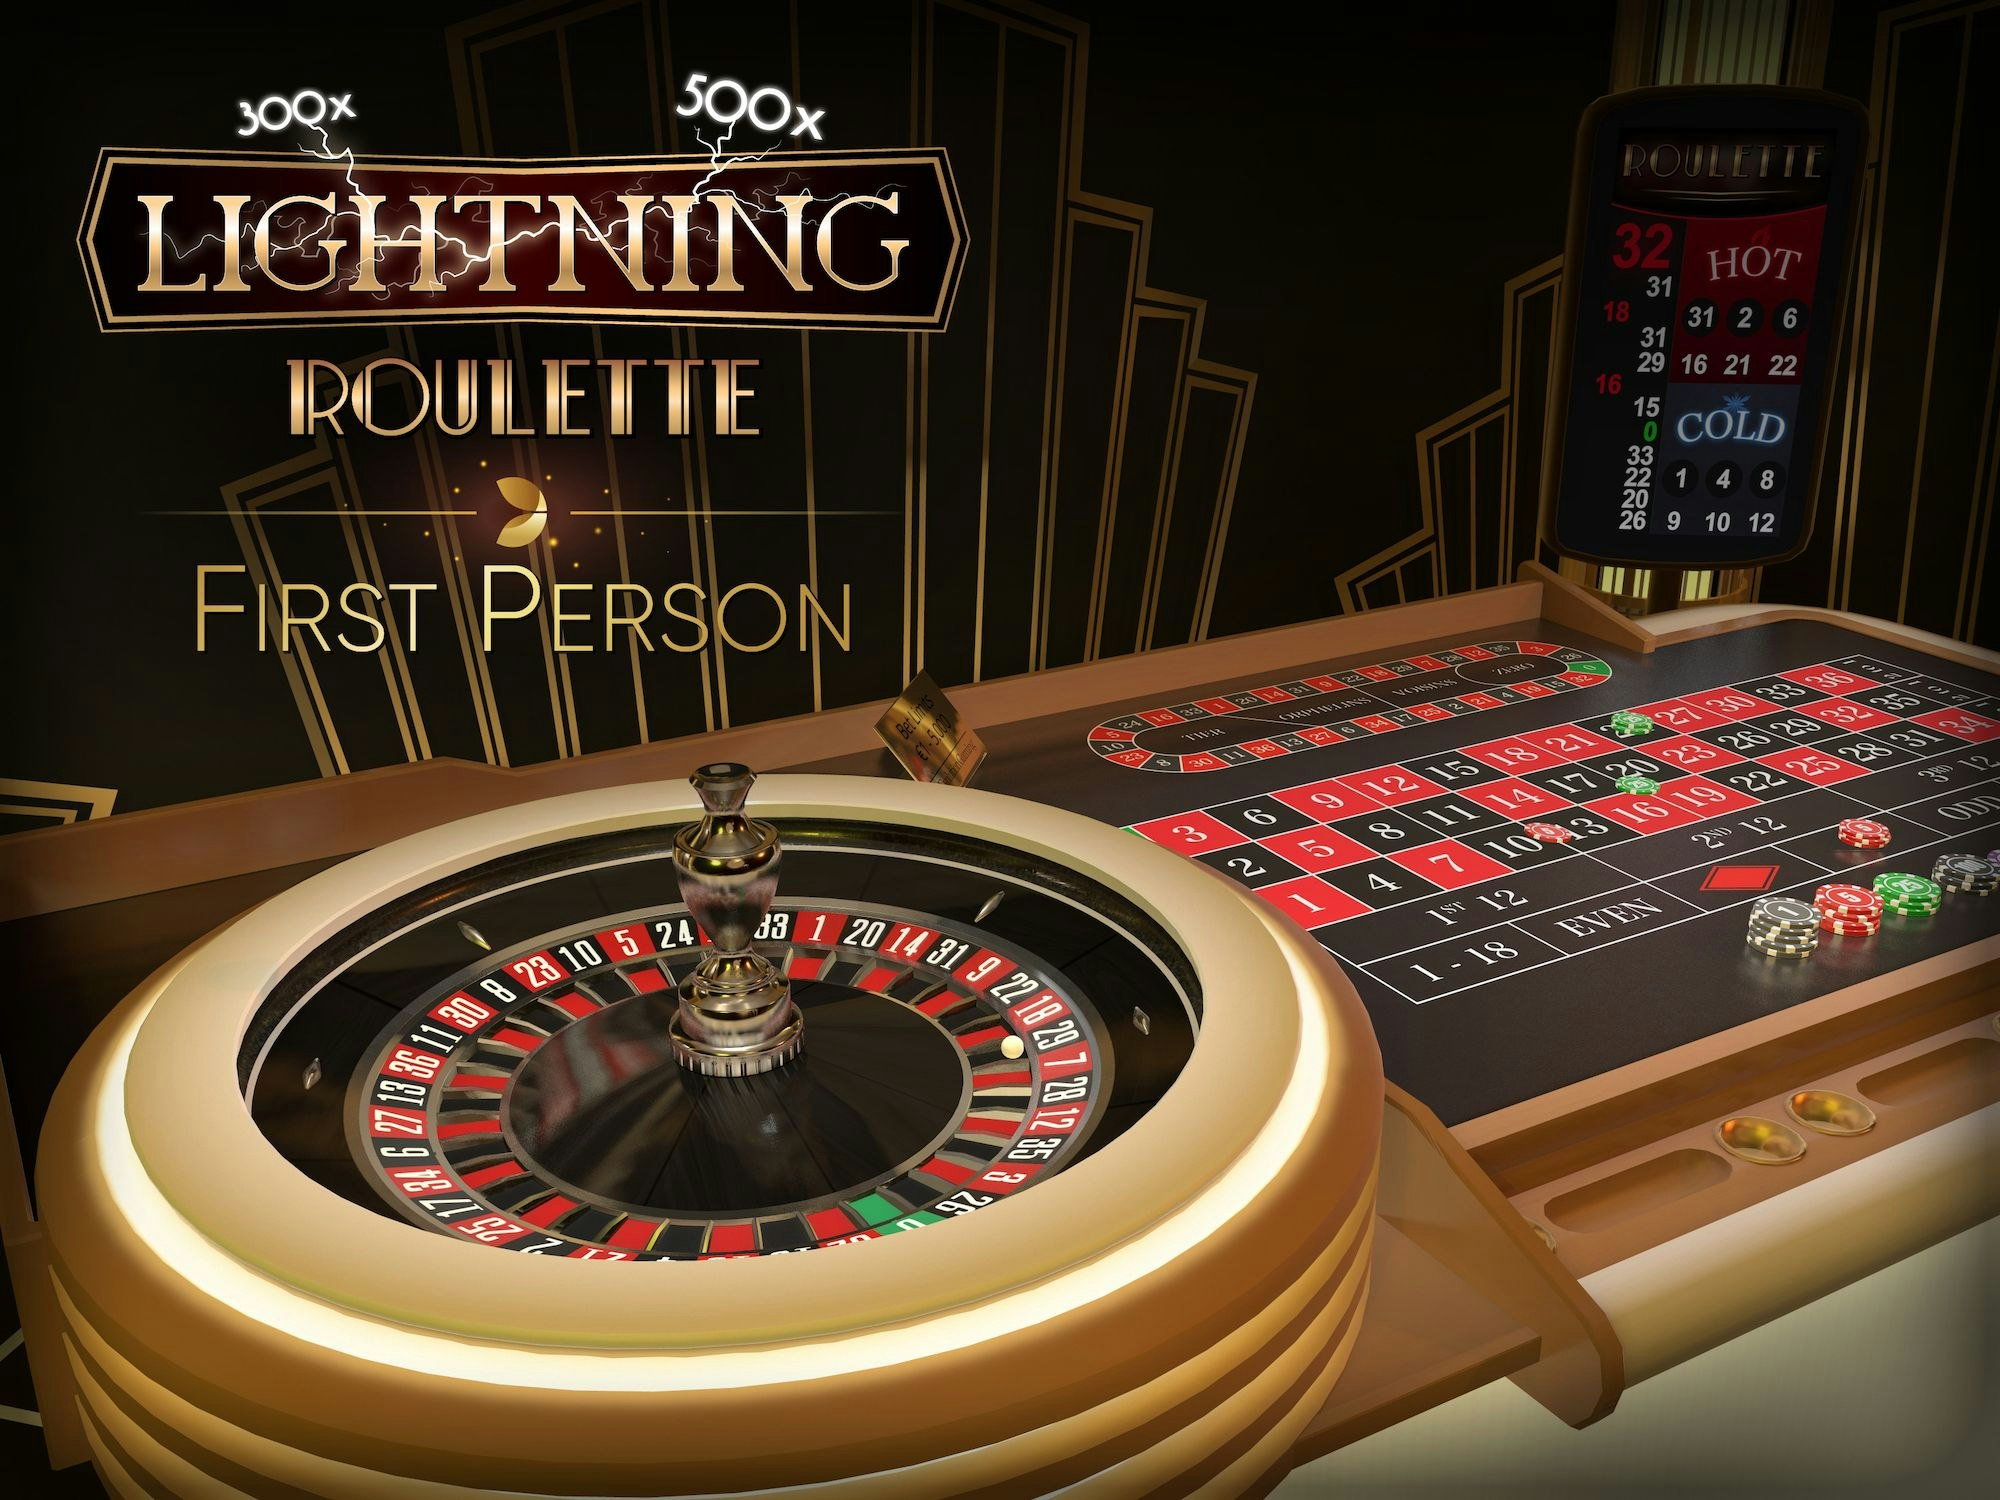 How to play Roulette online: Rules, strategy, odds, and house edge | The TwinSpires Edge